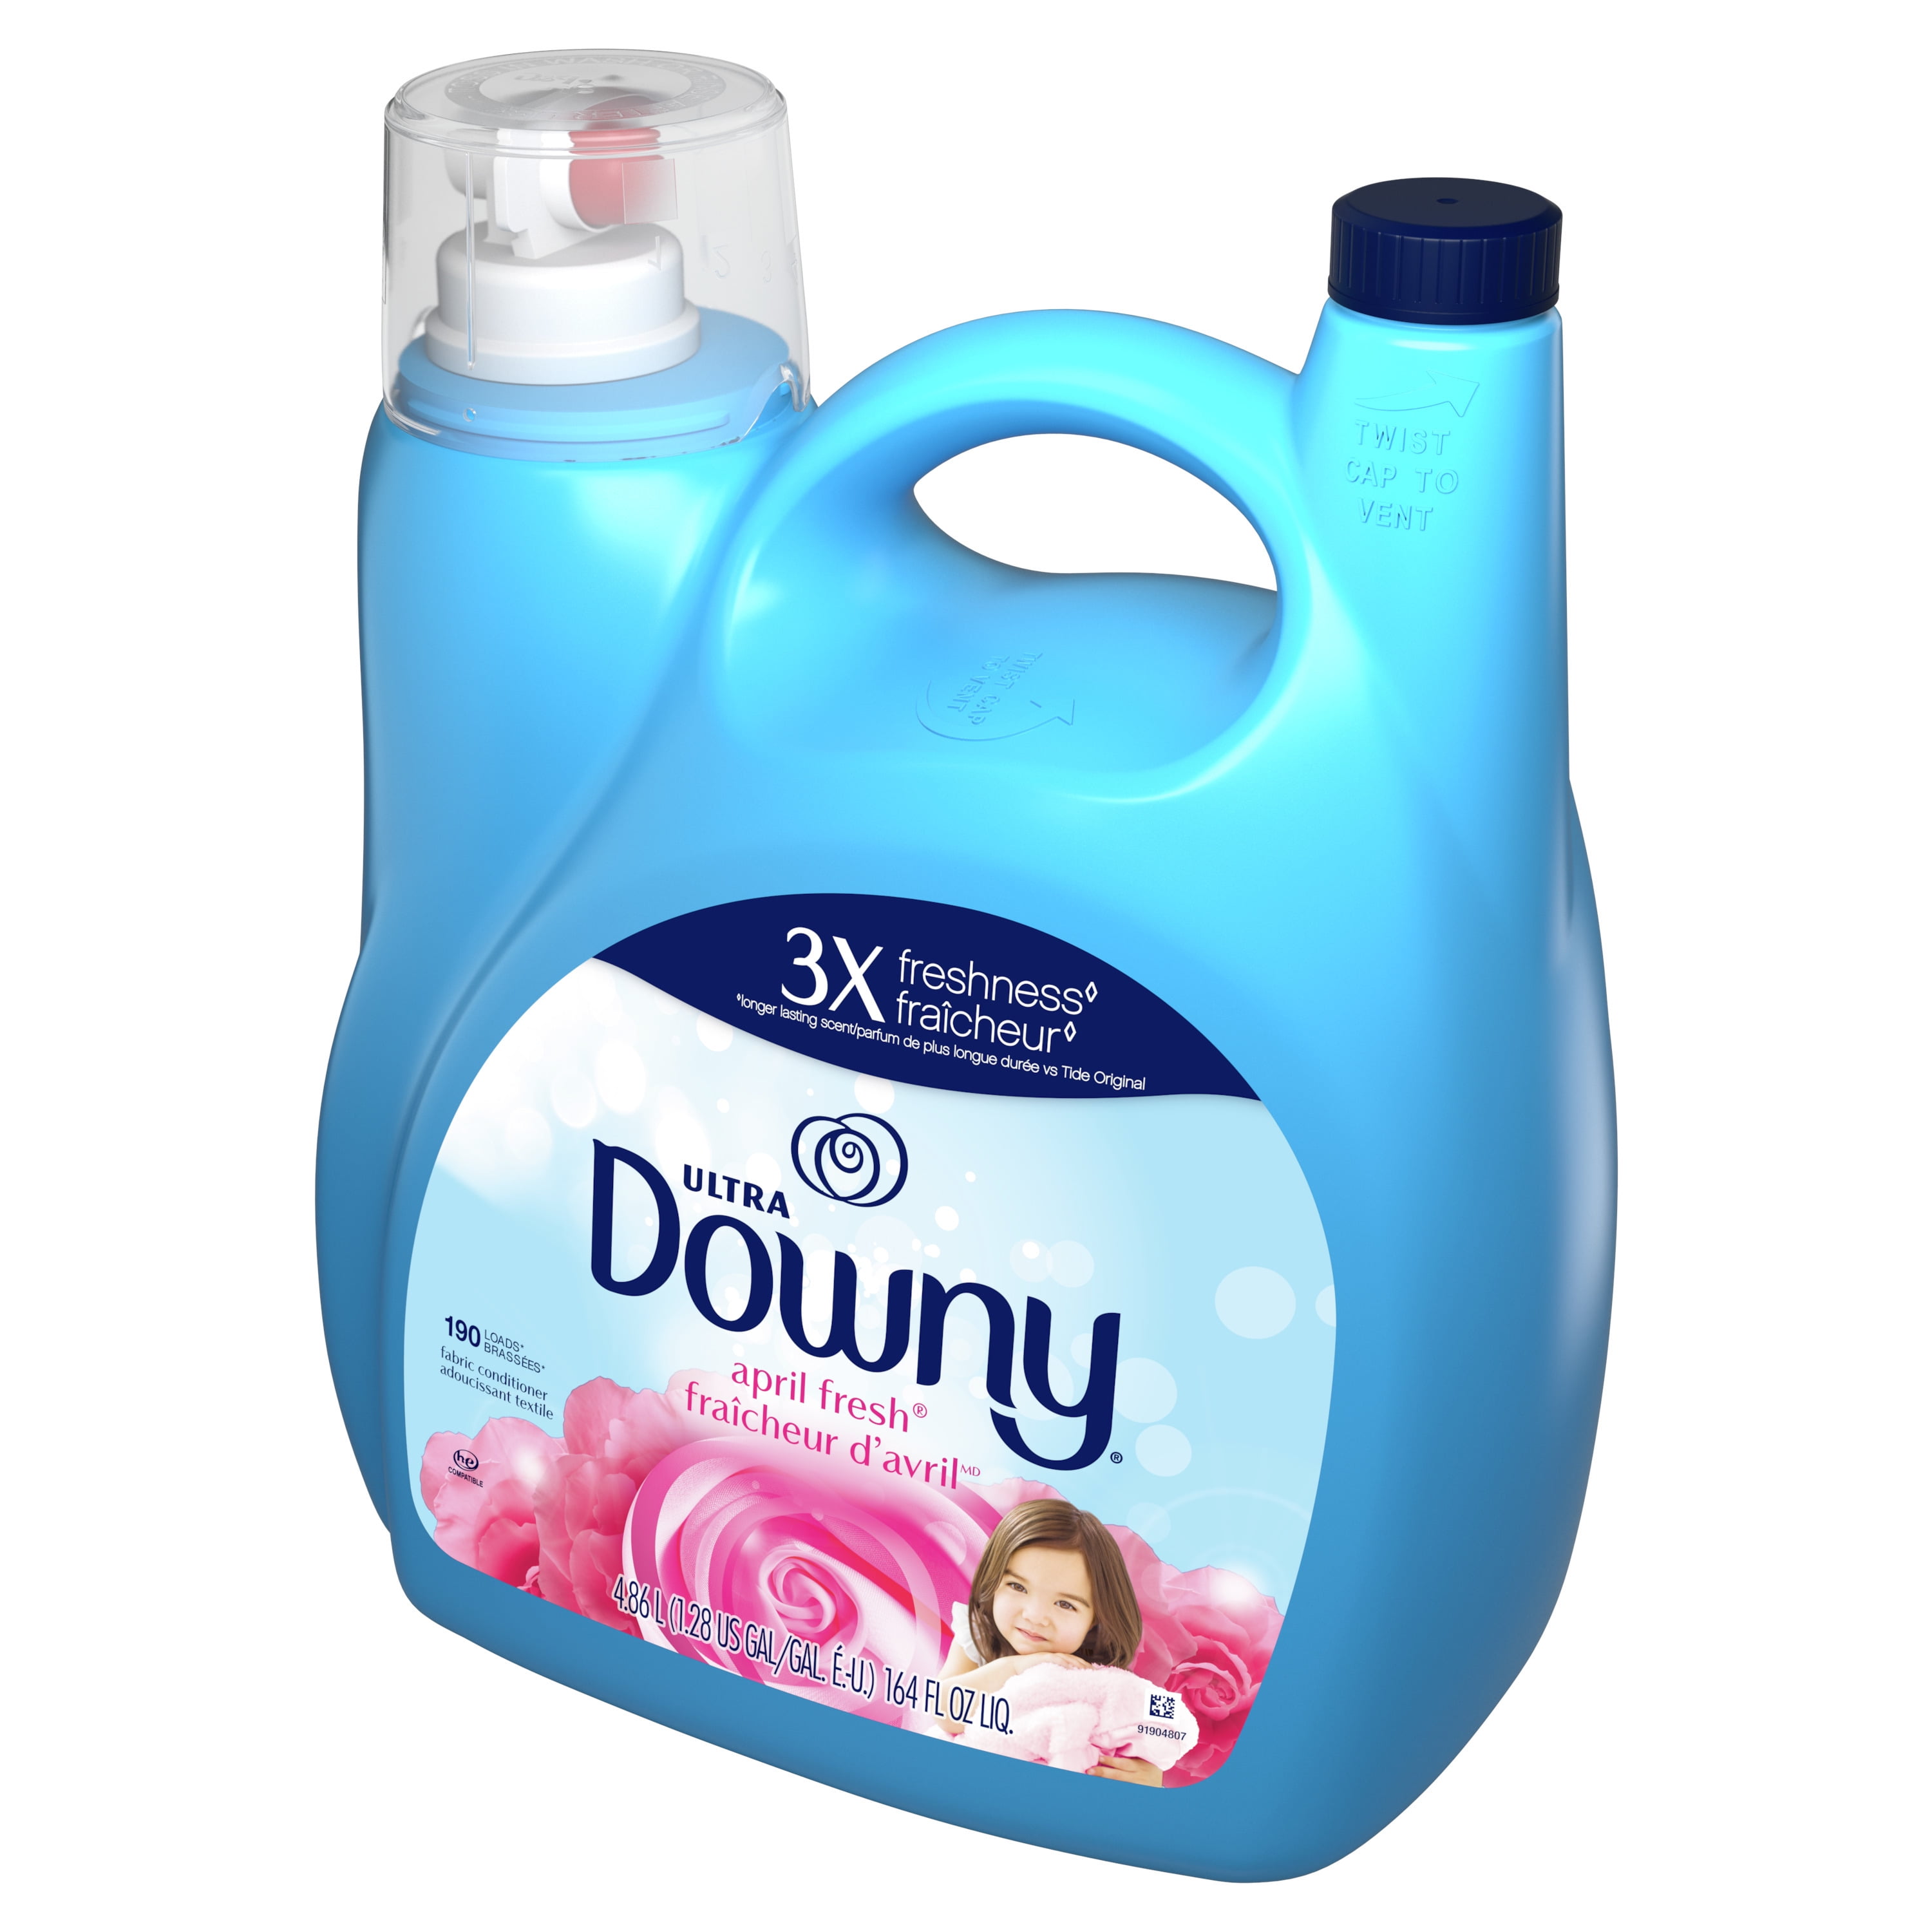 Downy Ultra Fabric Conditioner, April Fresh - 306 ml